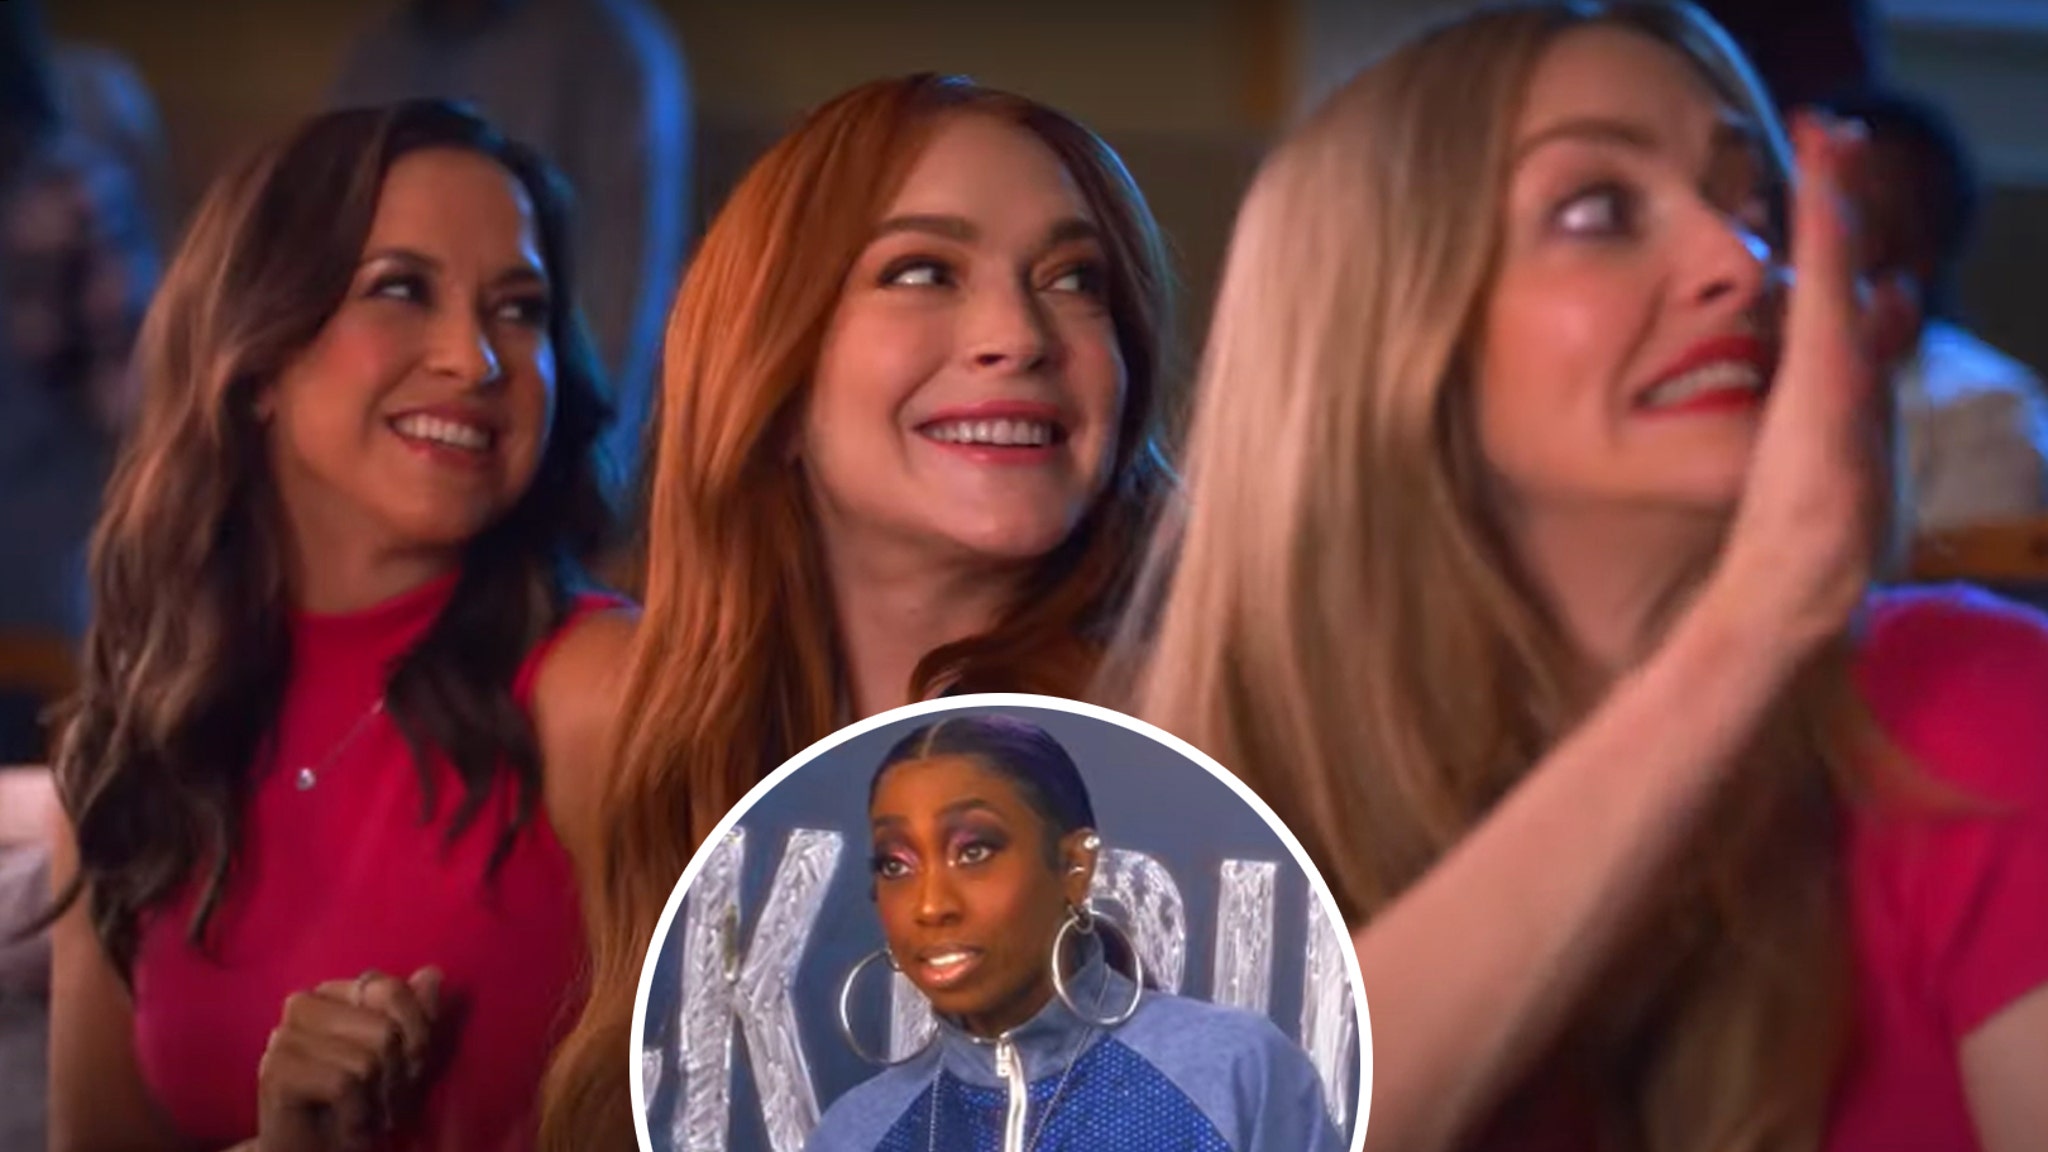 Mean Girls' Lindsay Lohan, Amanda Seyfried, Lacey Chabert Reprise Roles for New Ad